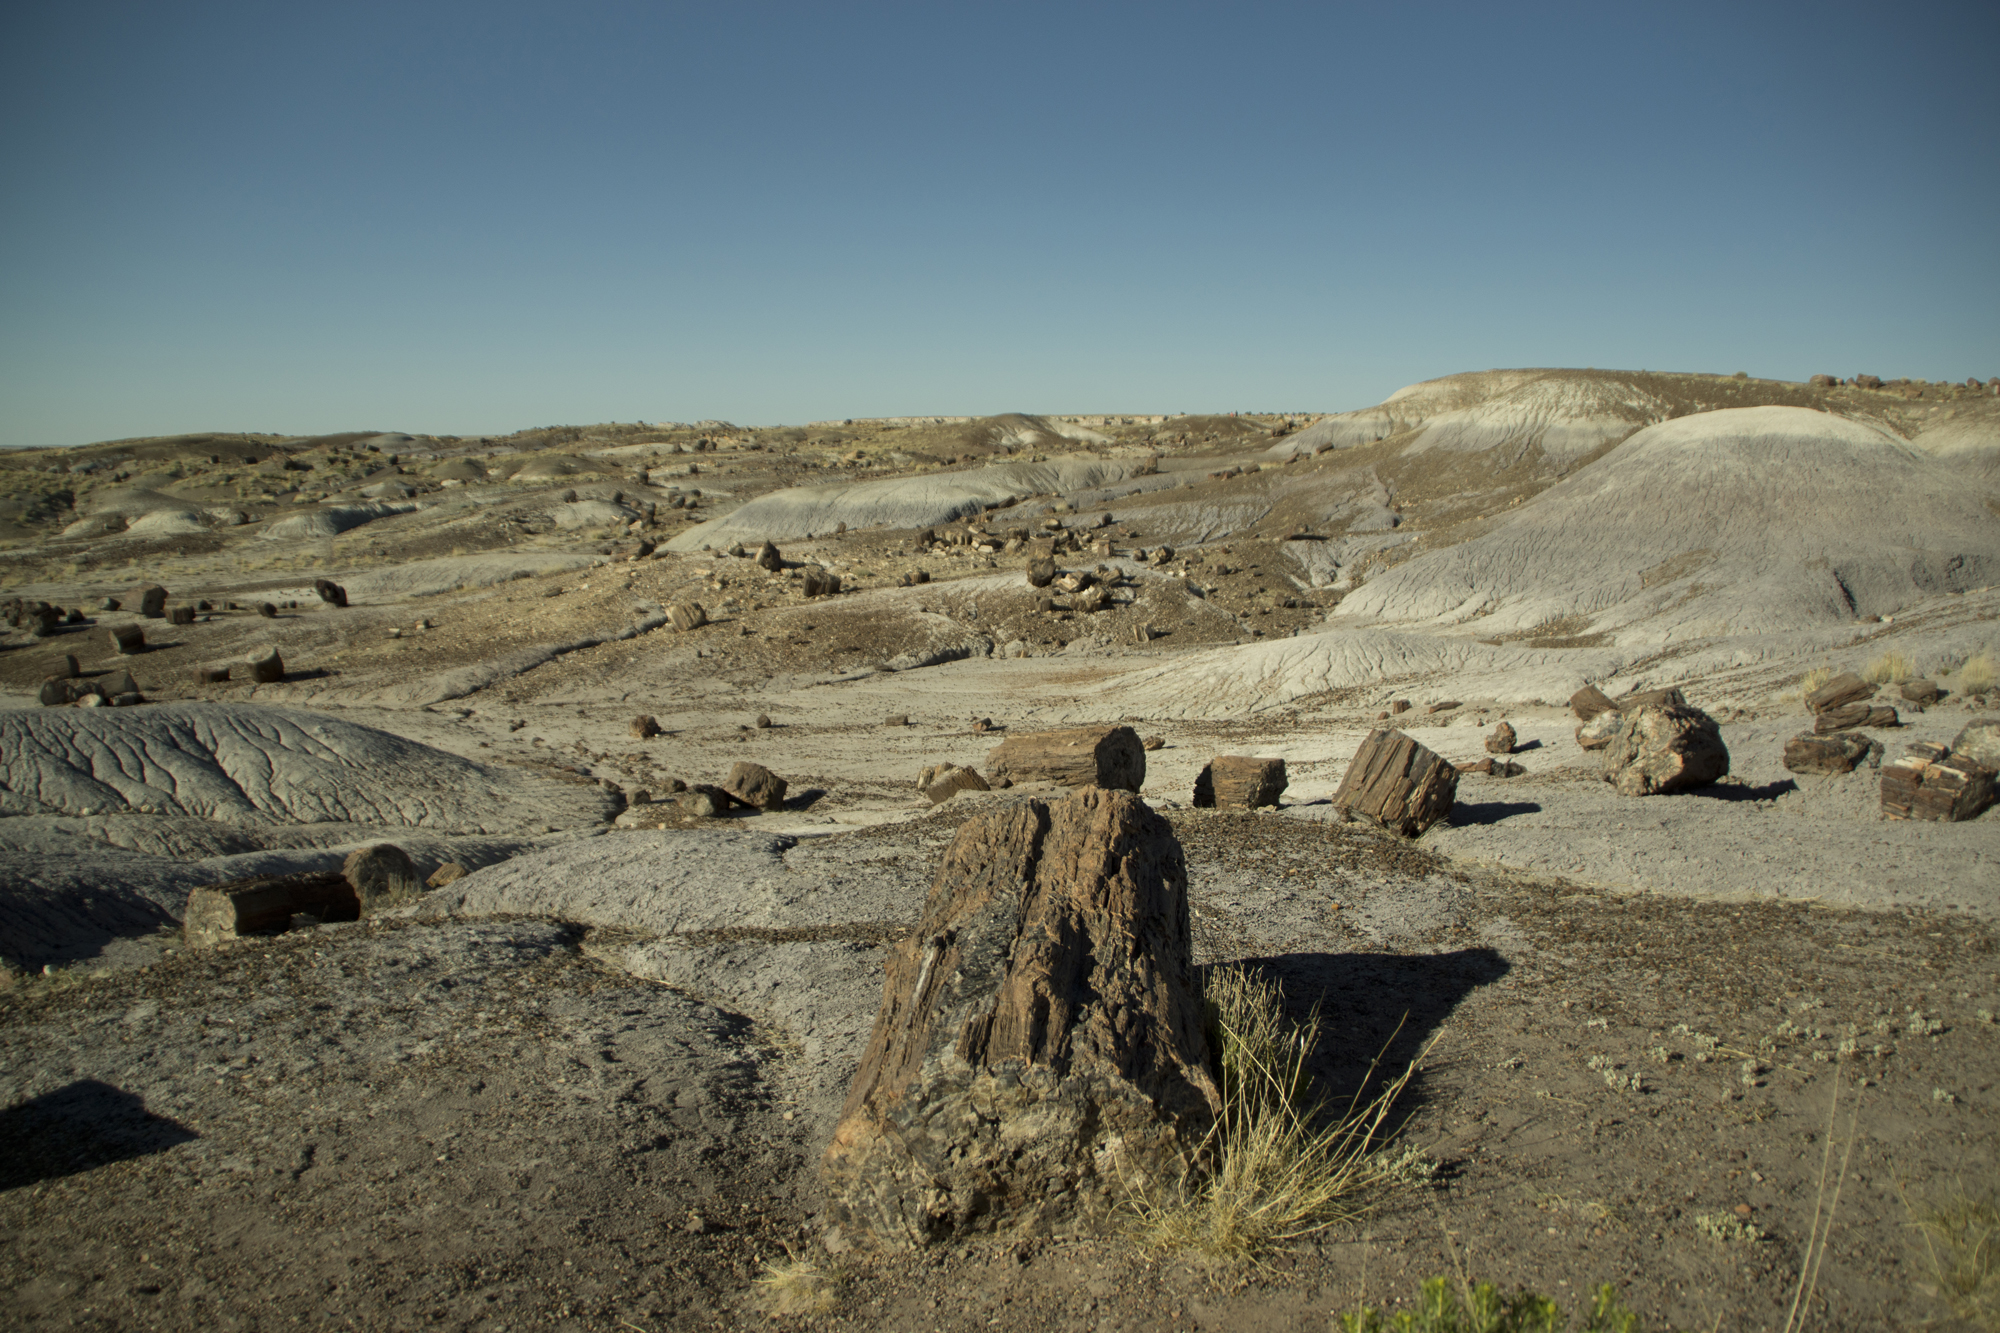  The petrified forest part, Petrified Forest National Park. 